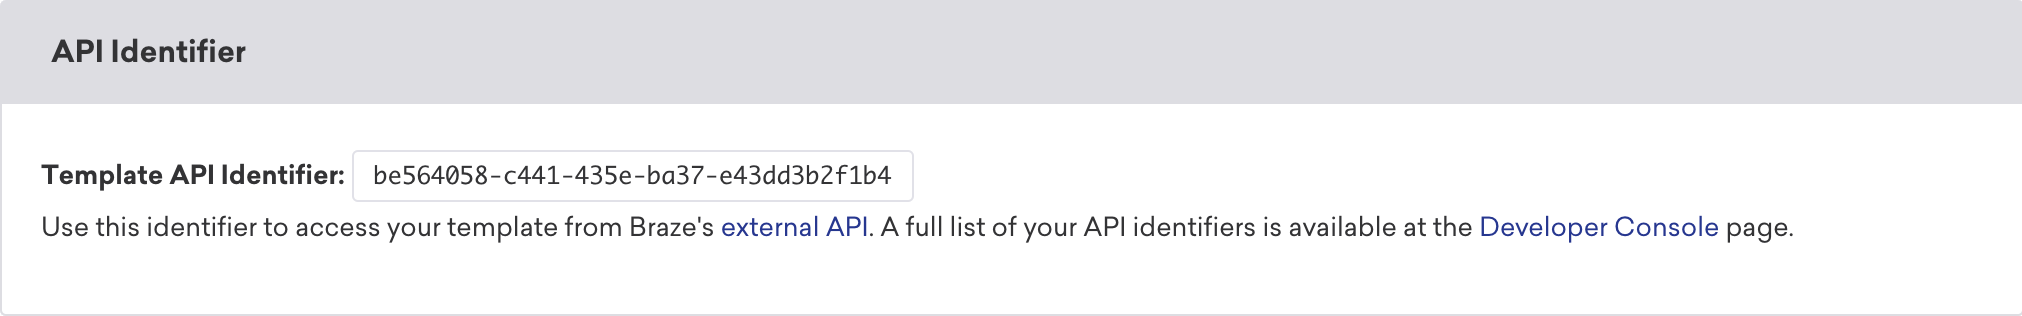 API identifier located at the bottom of an email template.